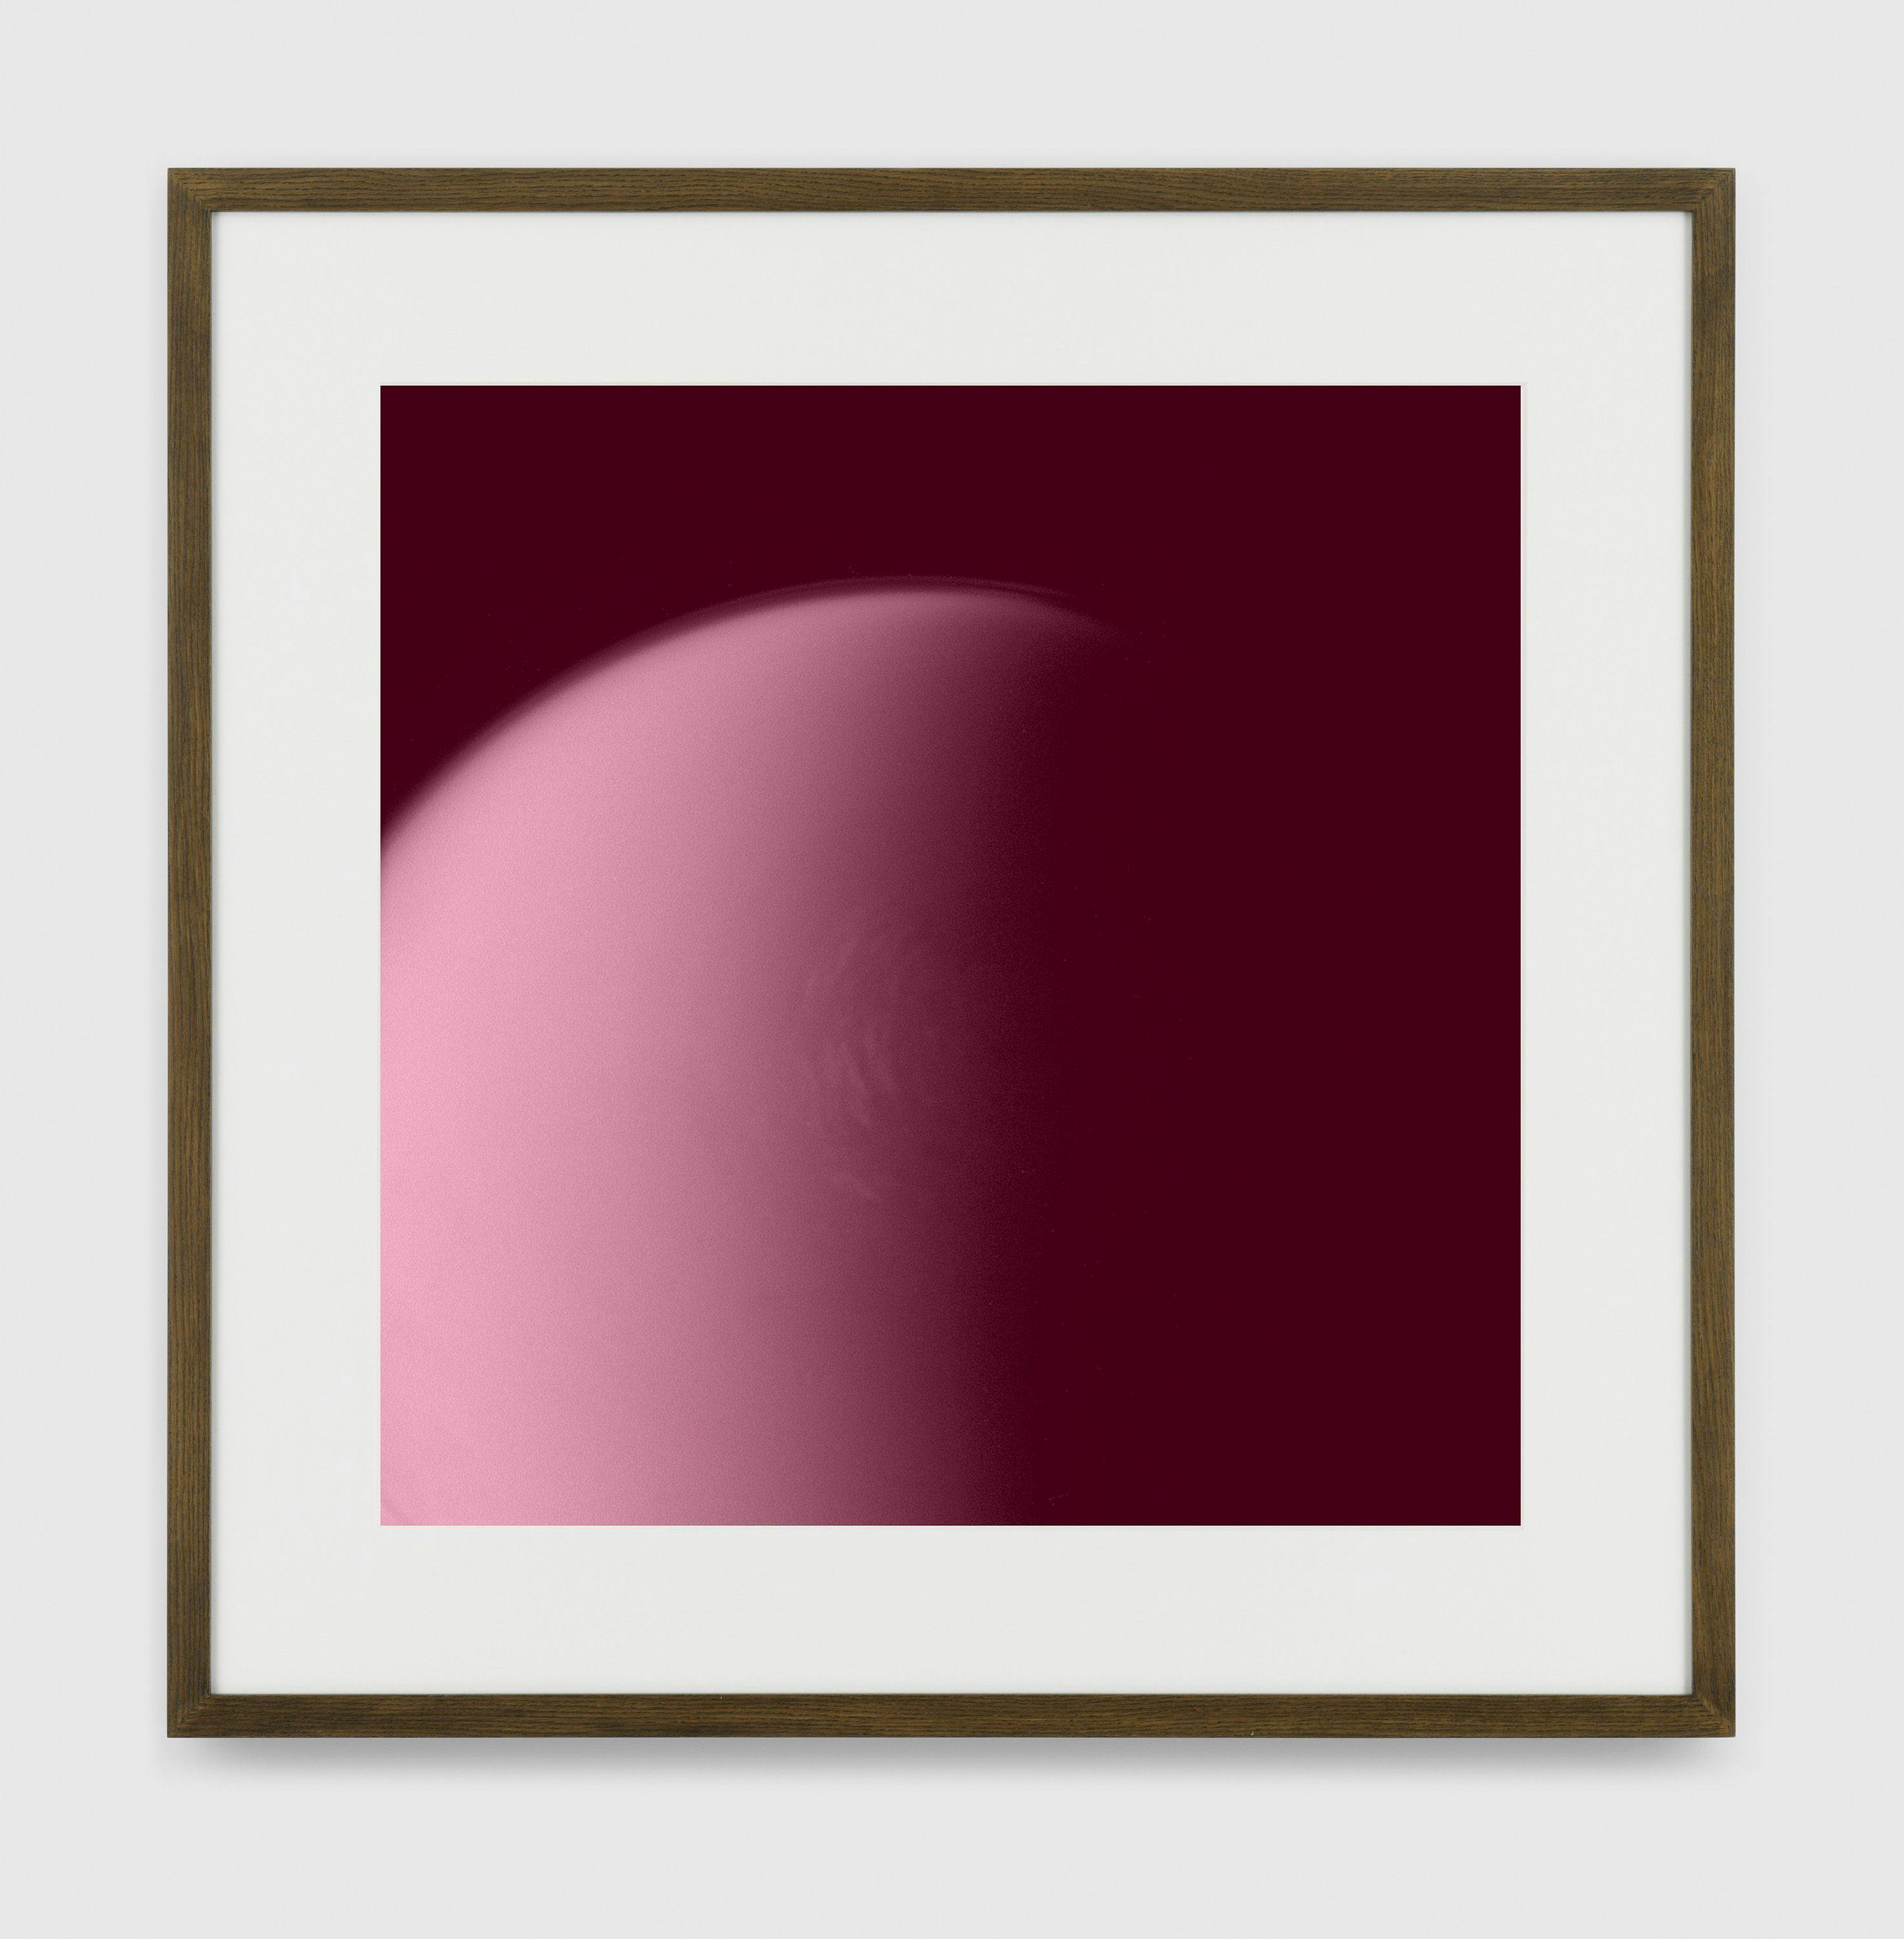 A photograph by Thomas Ruff, titled cassini 26, dated 2009.